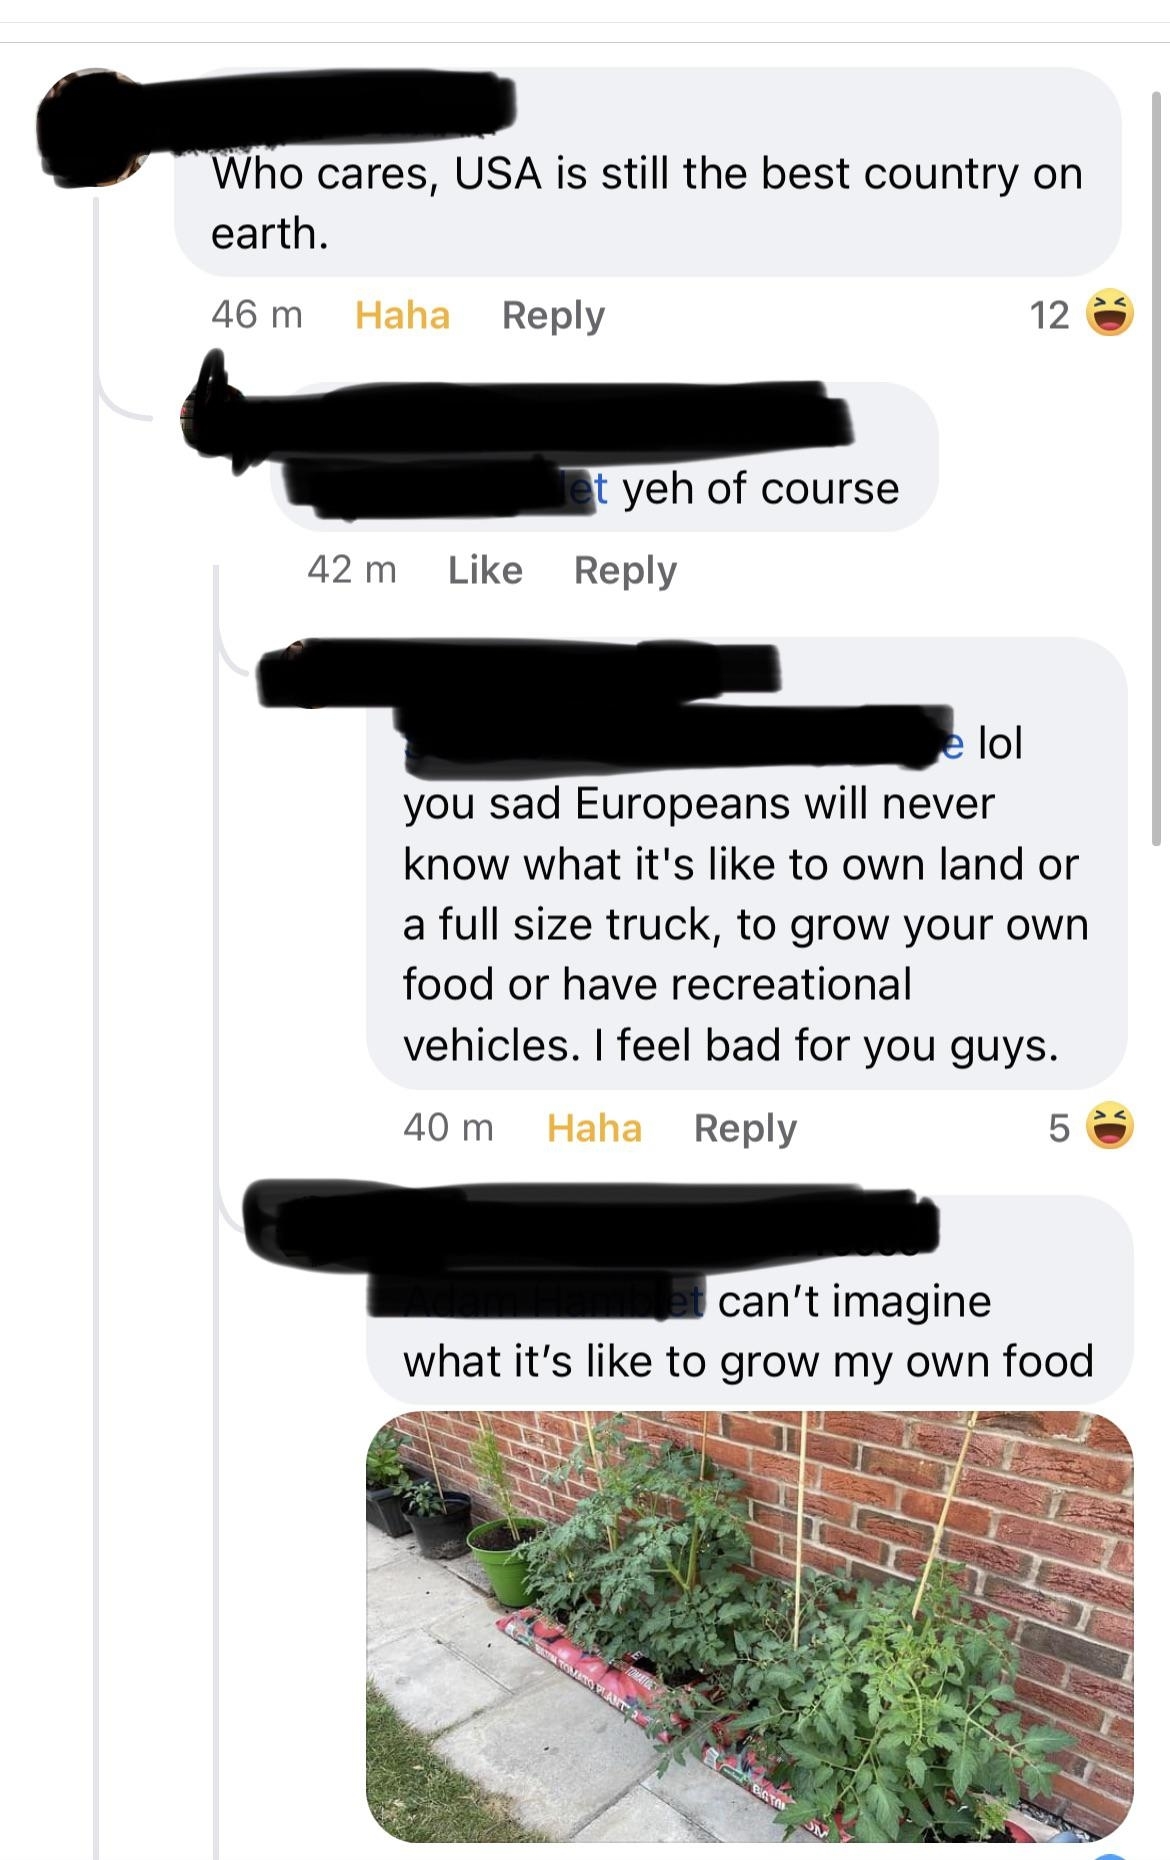 &quot;can&#x27;t imagine what it&#x27;s like to grow my own food&quot;